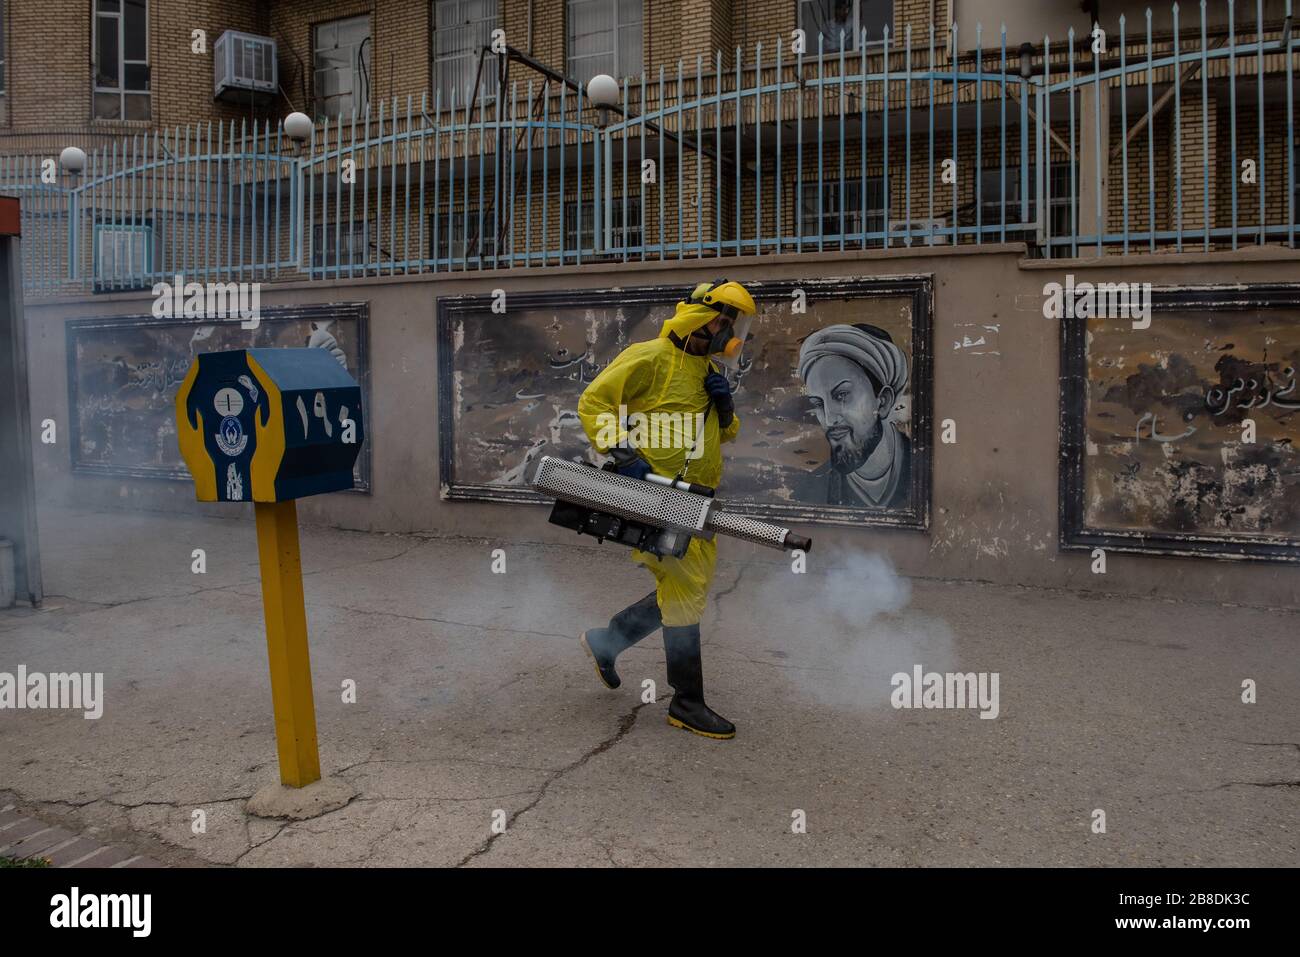 The Iranian health ministry, provincial fire department and municipal staffs disinfect the streets and other public places against Coronavirus using machinery and mobile pumps in Shiraz, Iran, Mar. 2020. Stock Photo